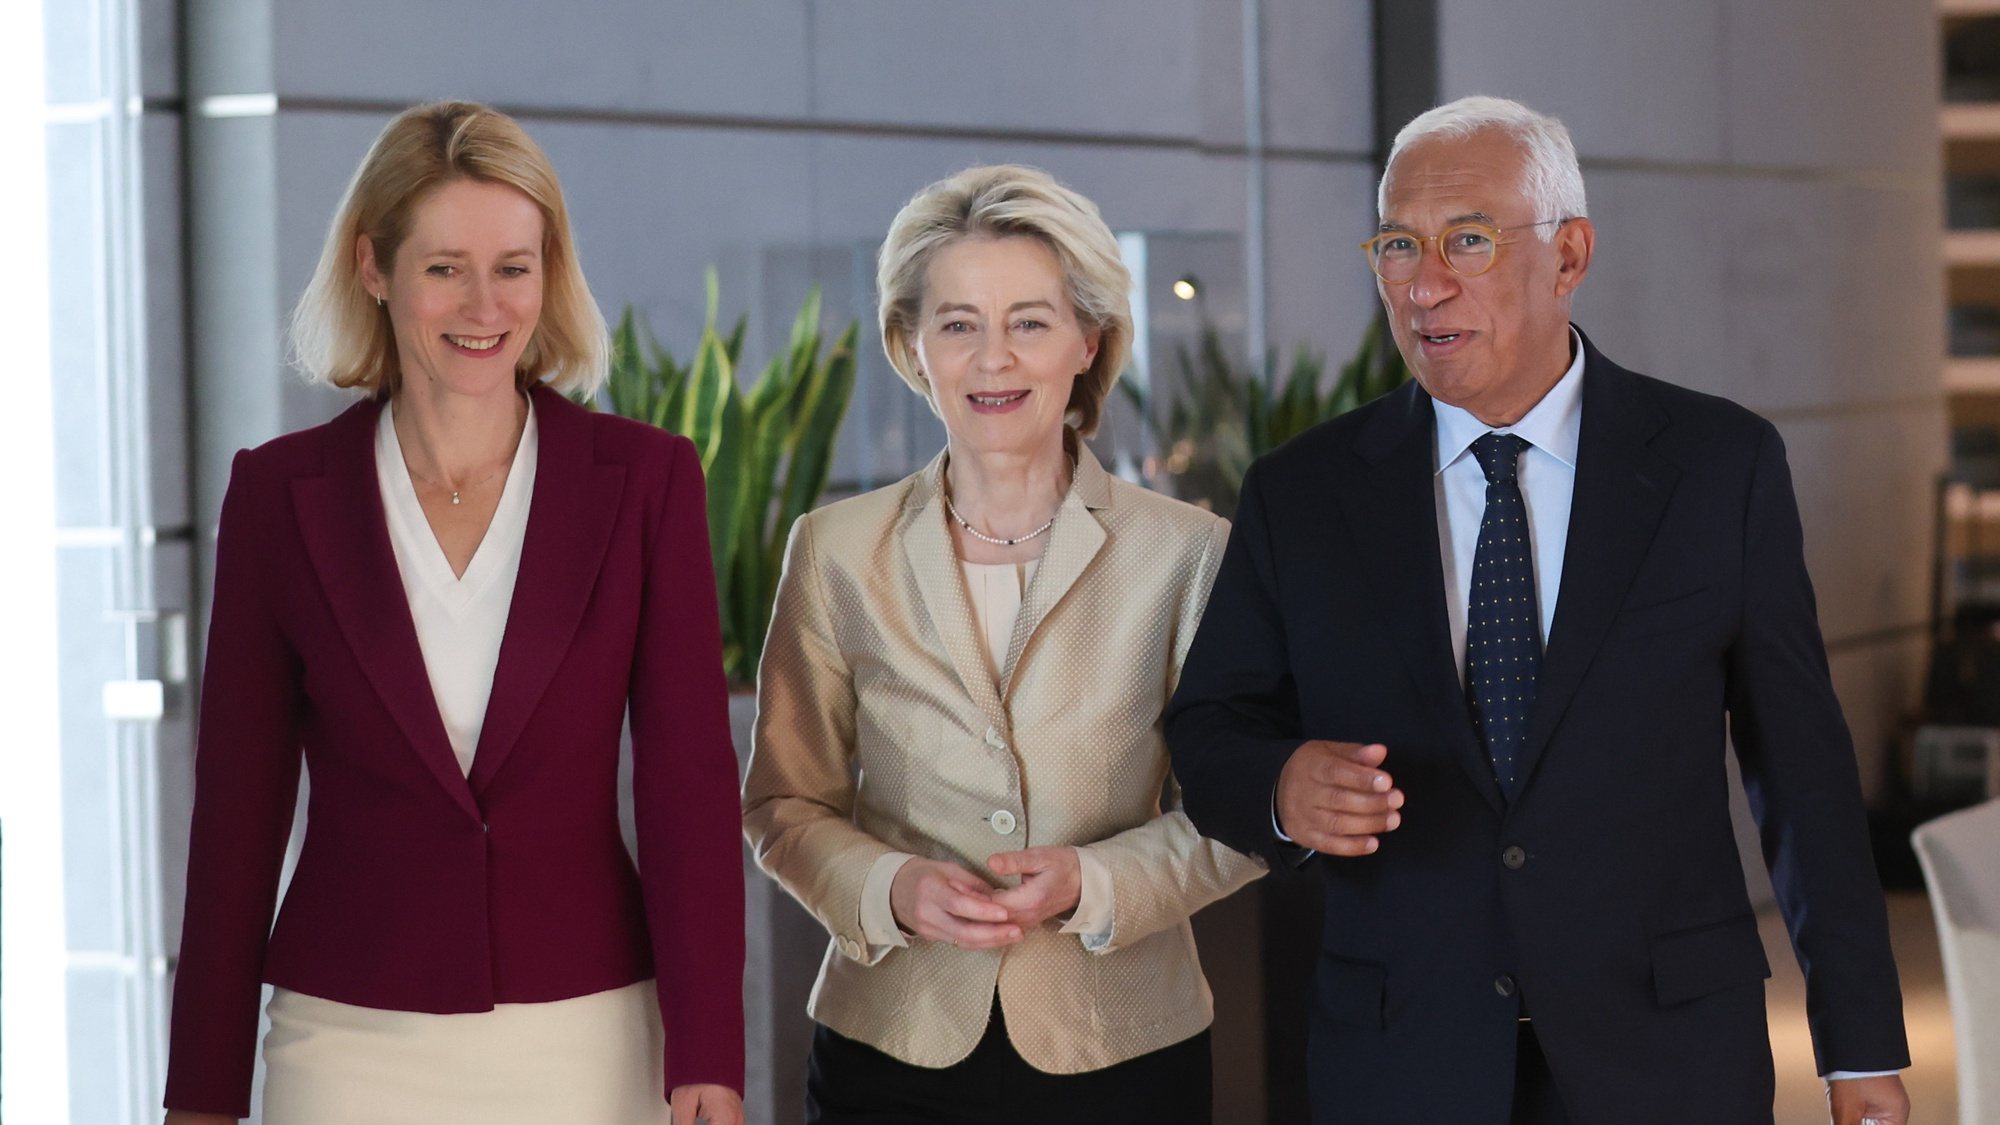 epa11443259 (L-R) Estonian Prime Minister Kaja Kallas, European Commission President Ursula Von der Leyen and former Portuguese Prime Minister Antonio Costa, during a meeting at Brussels Airport, a day after the EU summit in Brussels, Belgium, 28 June 2024. EU leaders agreed on proposing Ursula Von der Leyen as candidate for President of the European Commission and Kaja Kallas as High Representative of the Union for Foreign Affairs and Security Policy, while Antonio Costa was elected as European Council President during a summit to discuss the Strategic Agenda 2024-2029, the next institutional cycle, Ukraine, the Middle East, competitiveness, security and defense, among other topics.  EPA/OLIVIER HOSLET / POOL